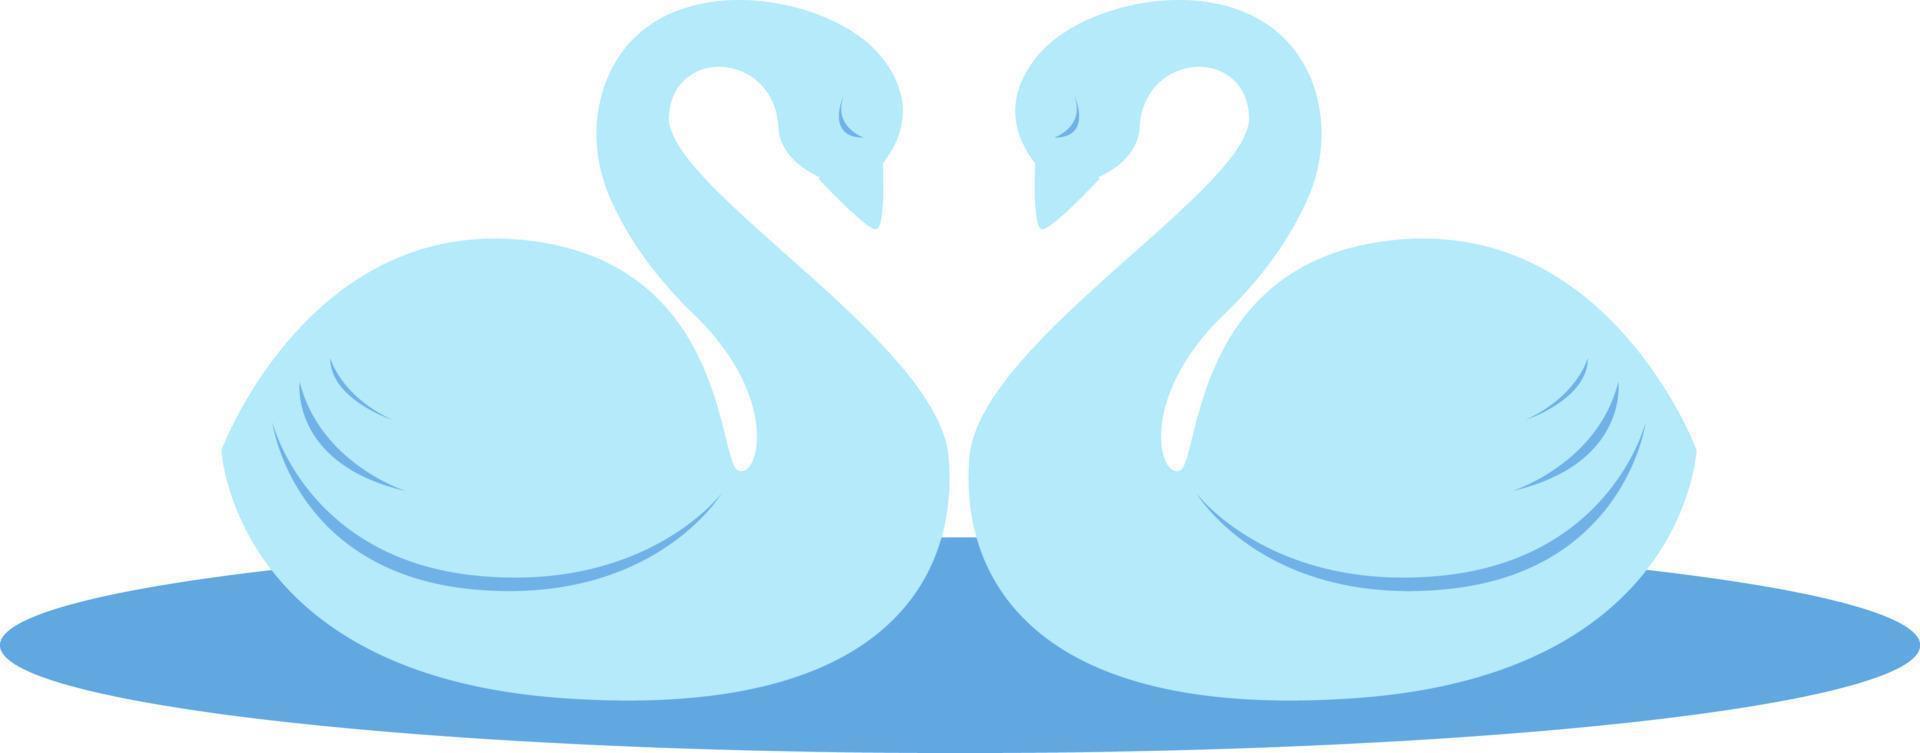 Pair of swans, illustration, vector on white background.